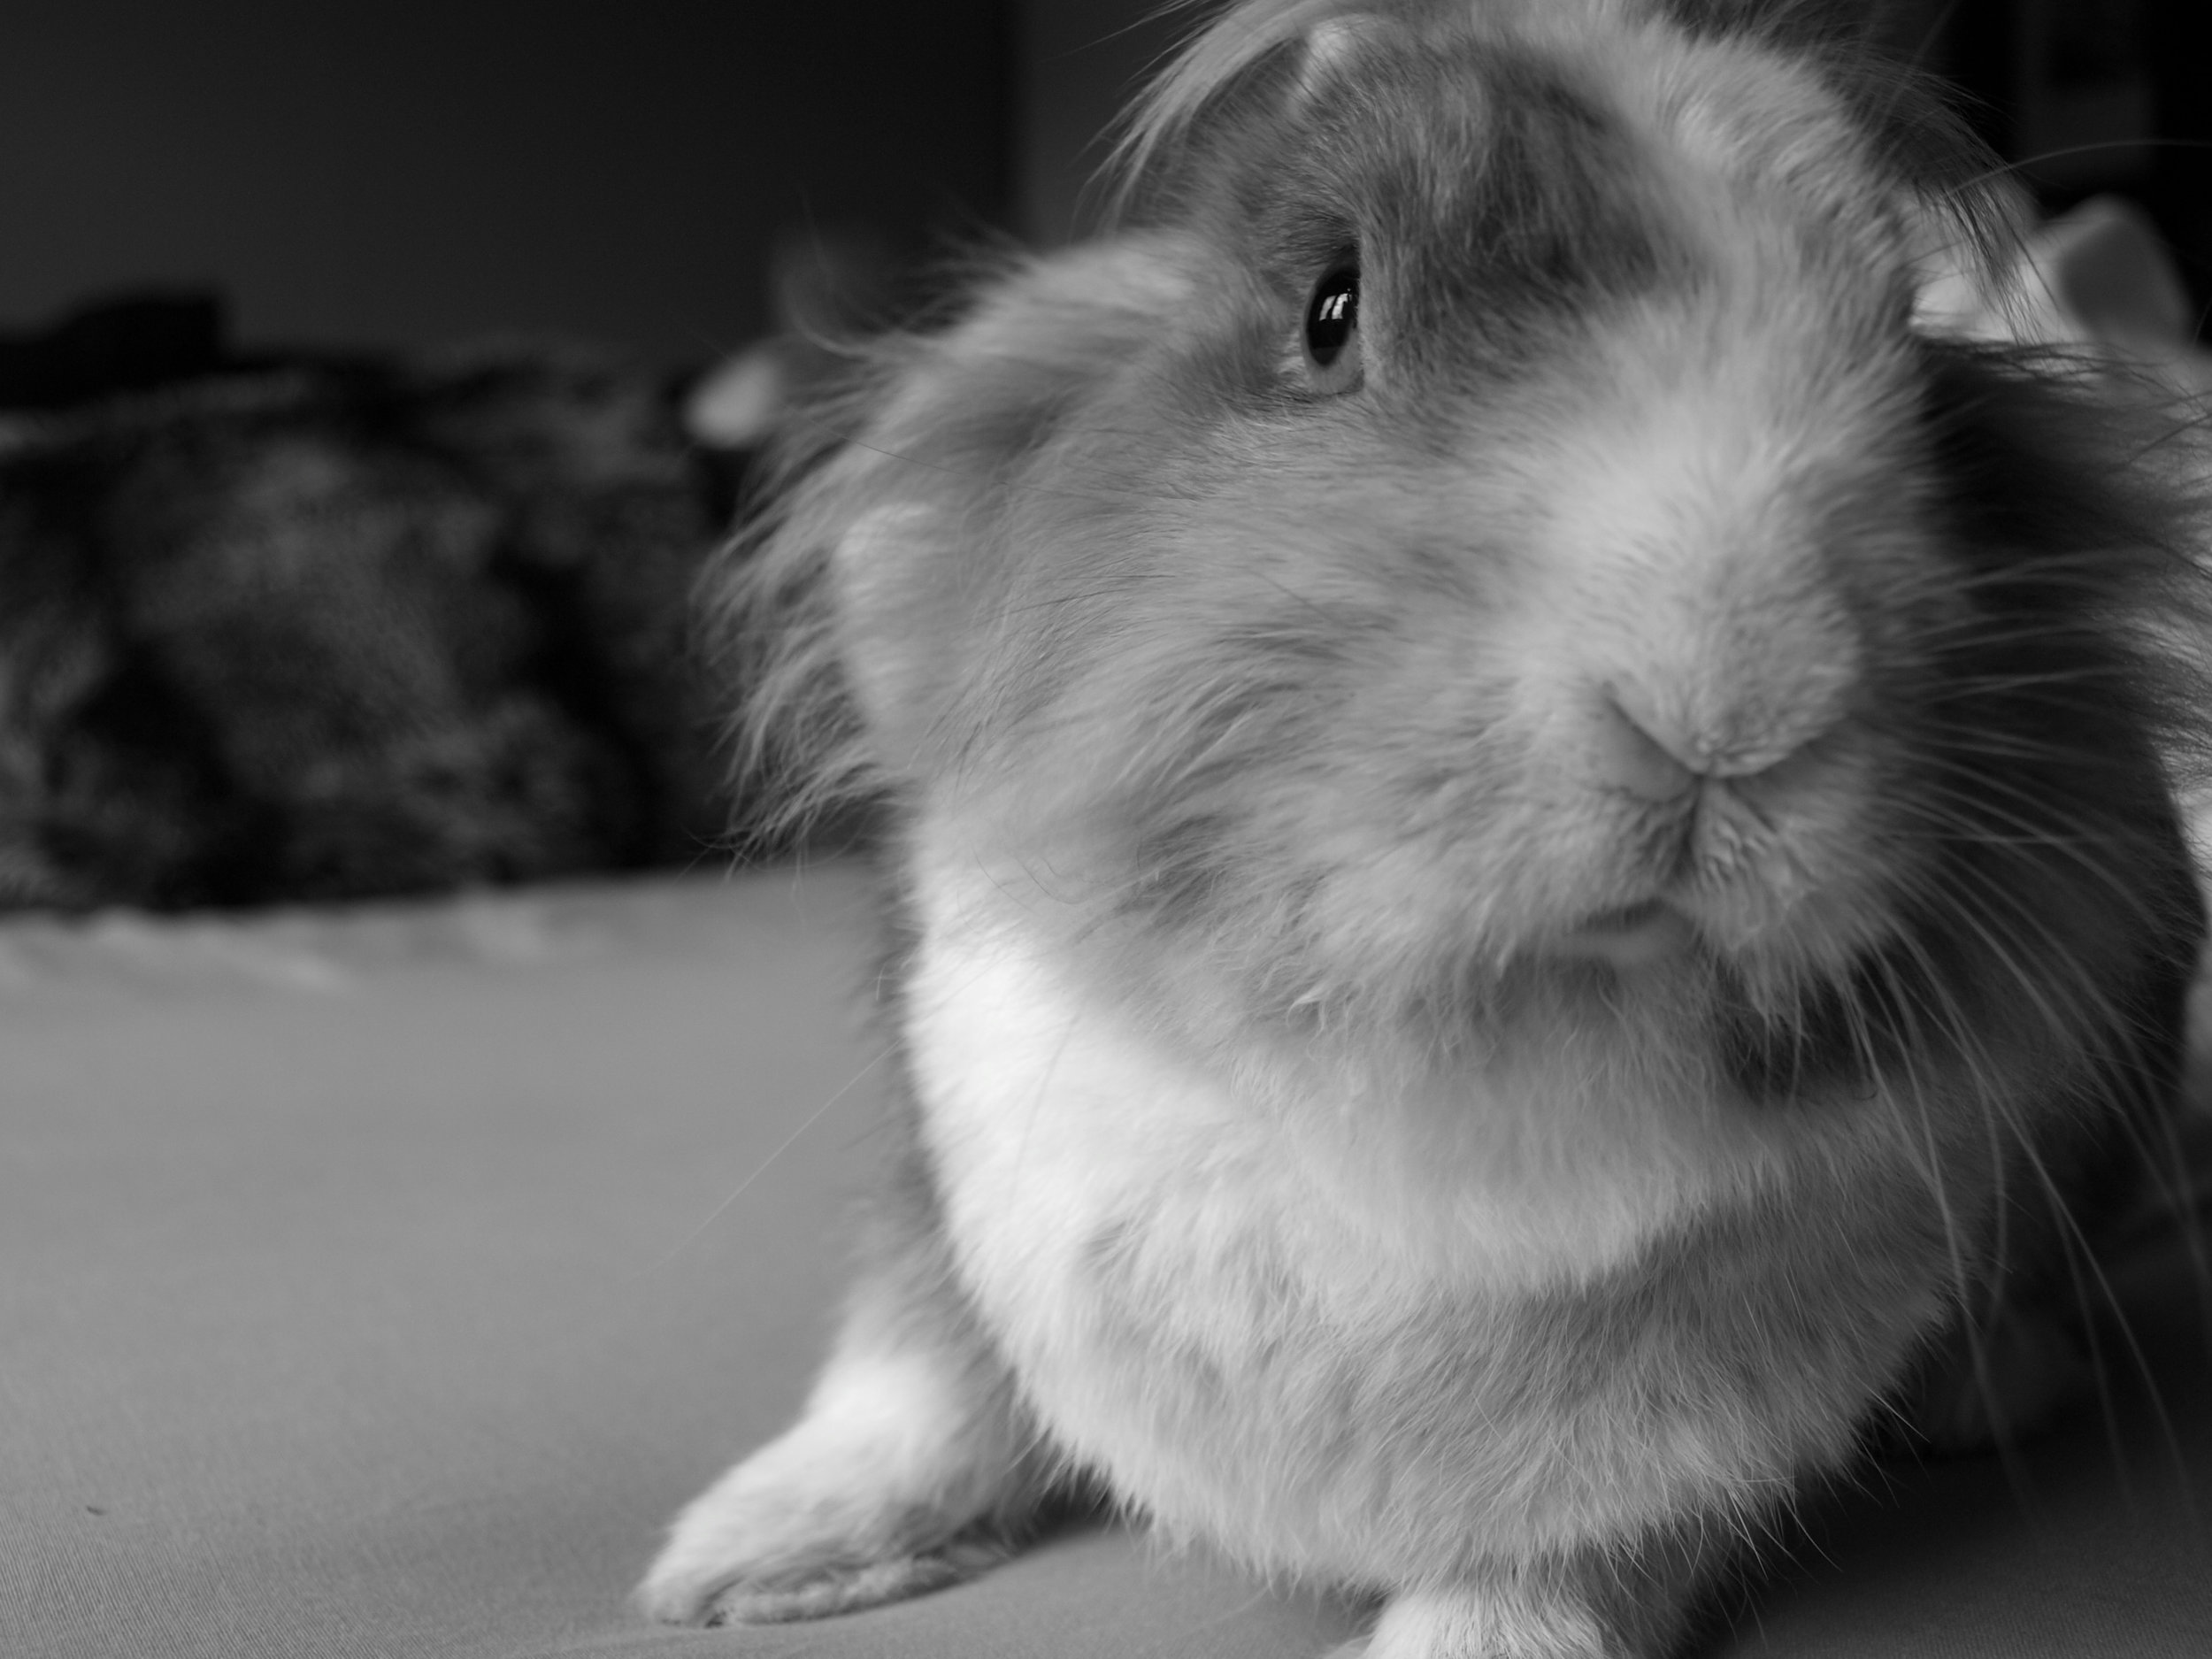 A Triptych of Bunny Portraits 1